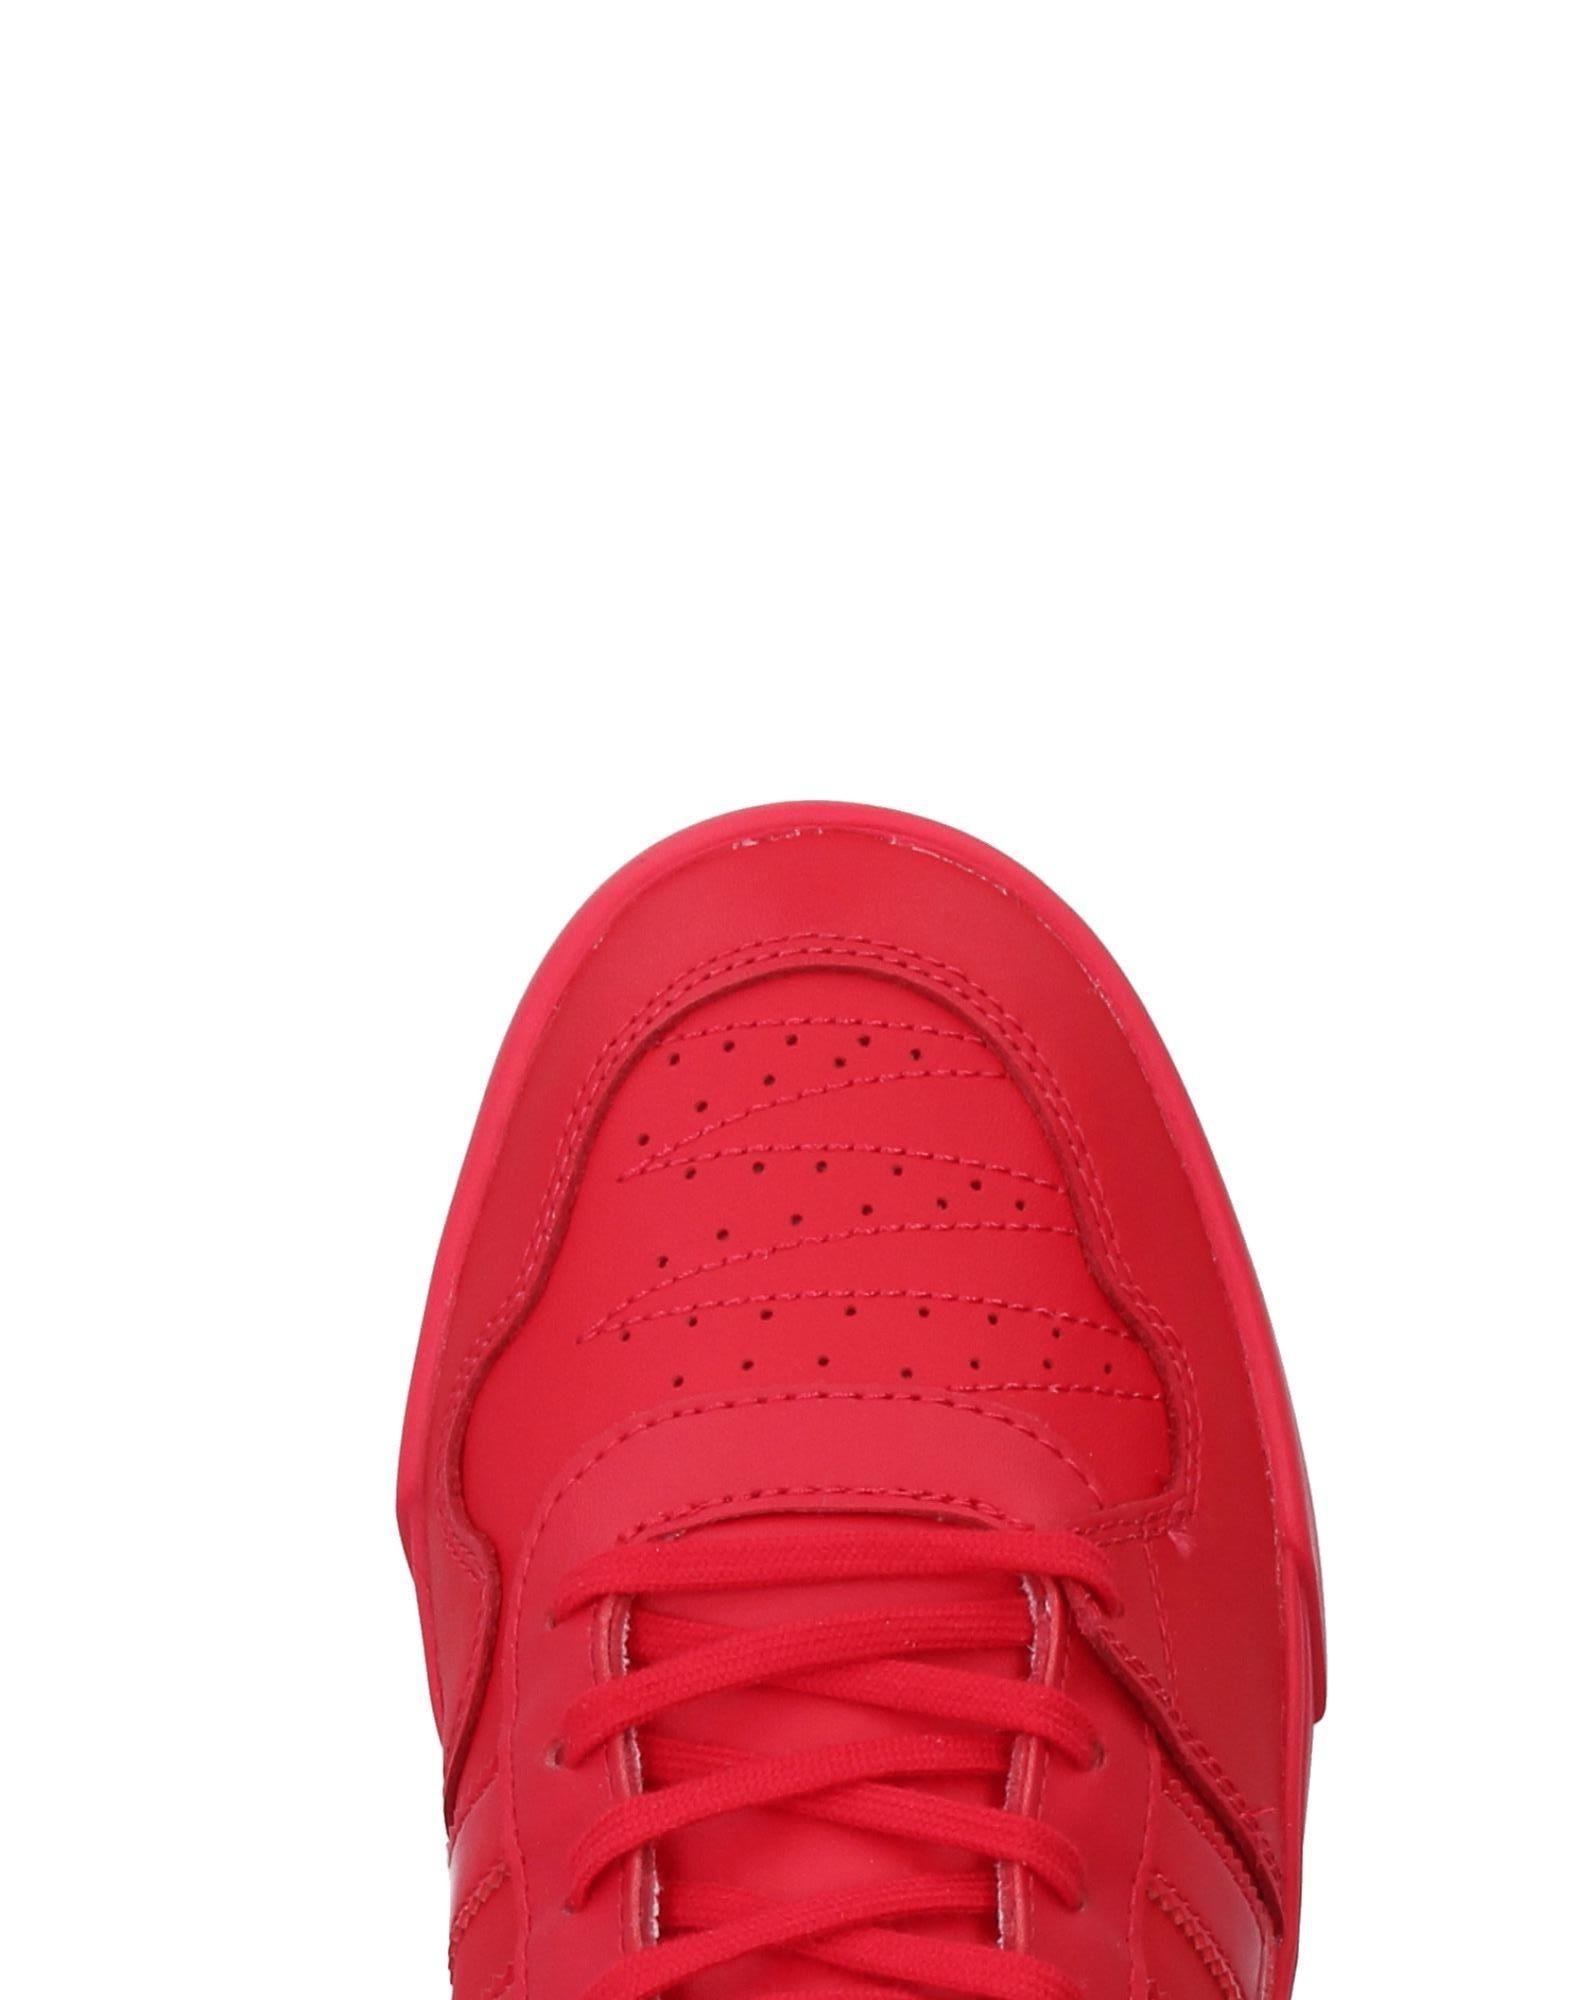 adidas Originals Leather High-tops & Sneakers in Red - Lyst